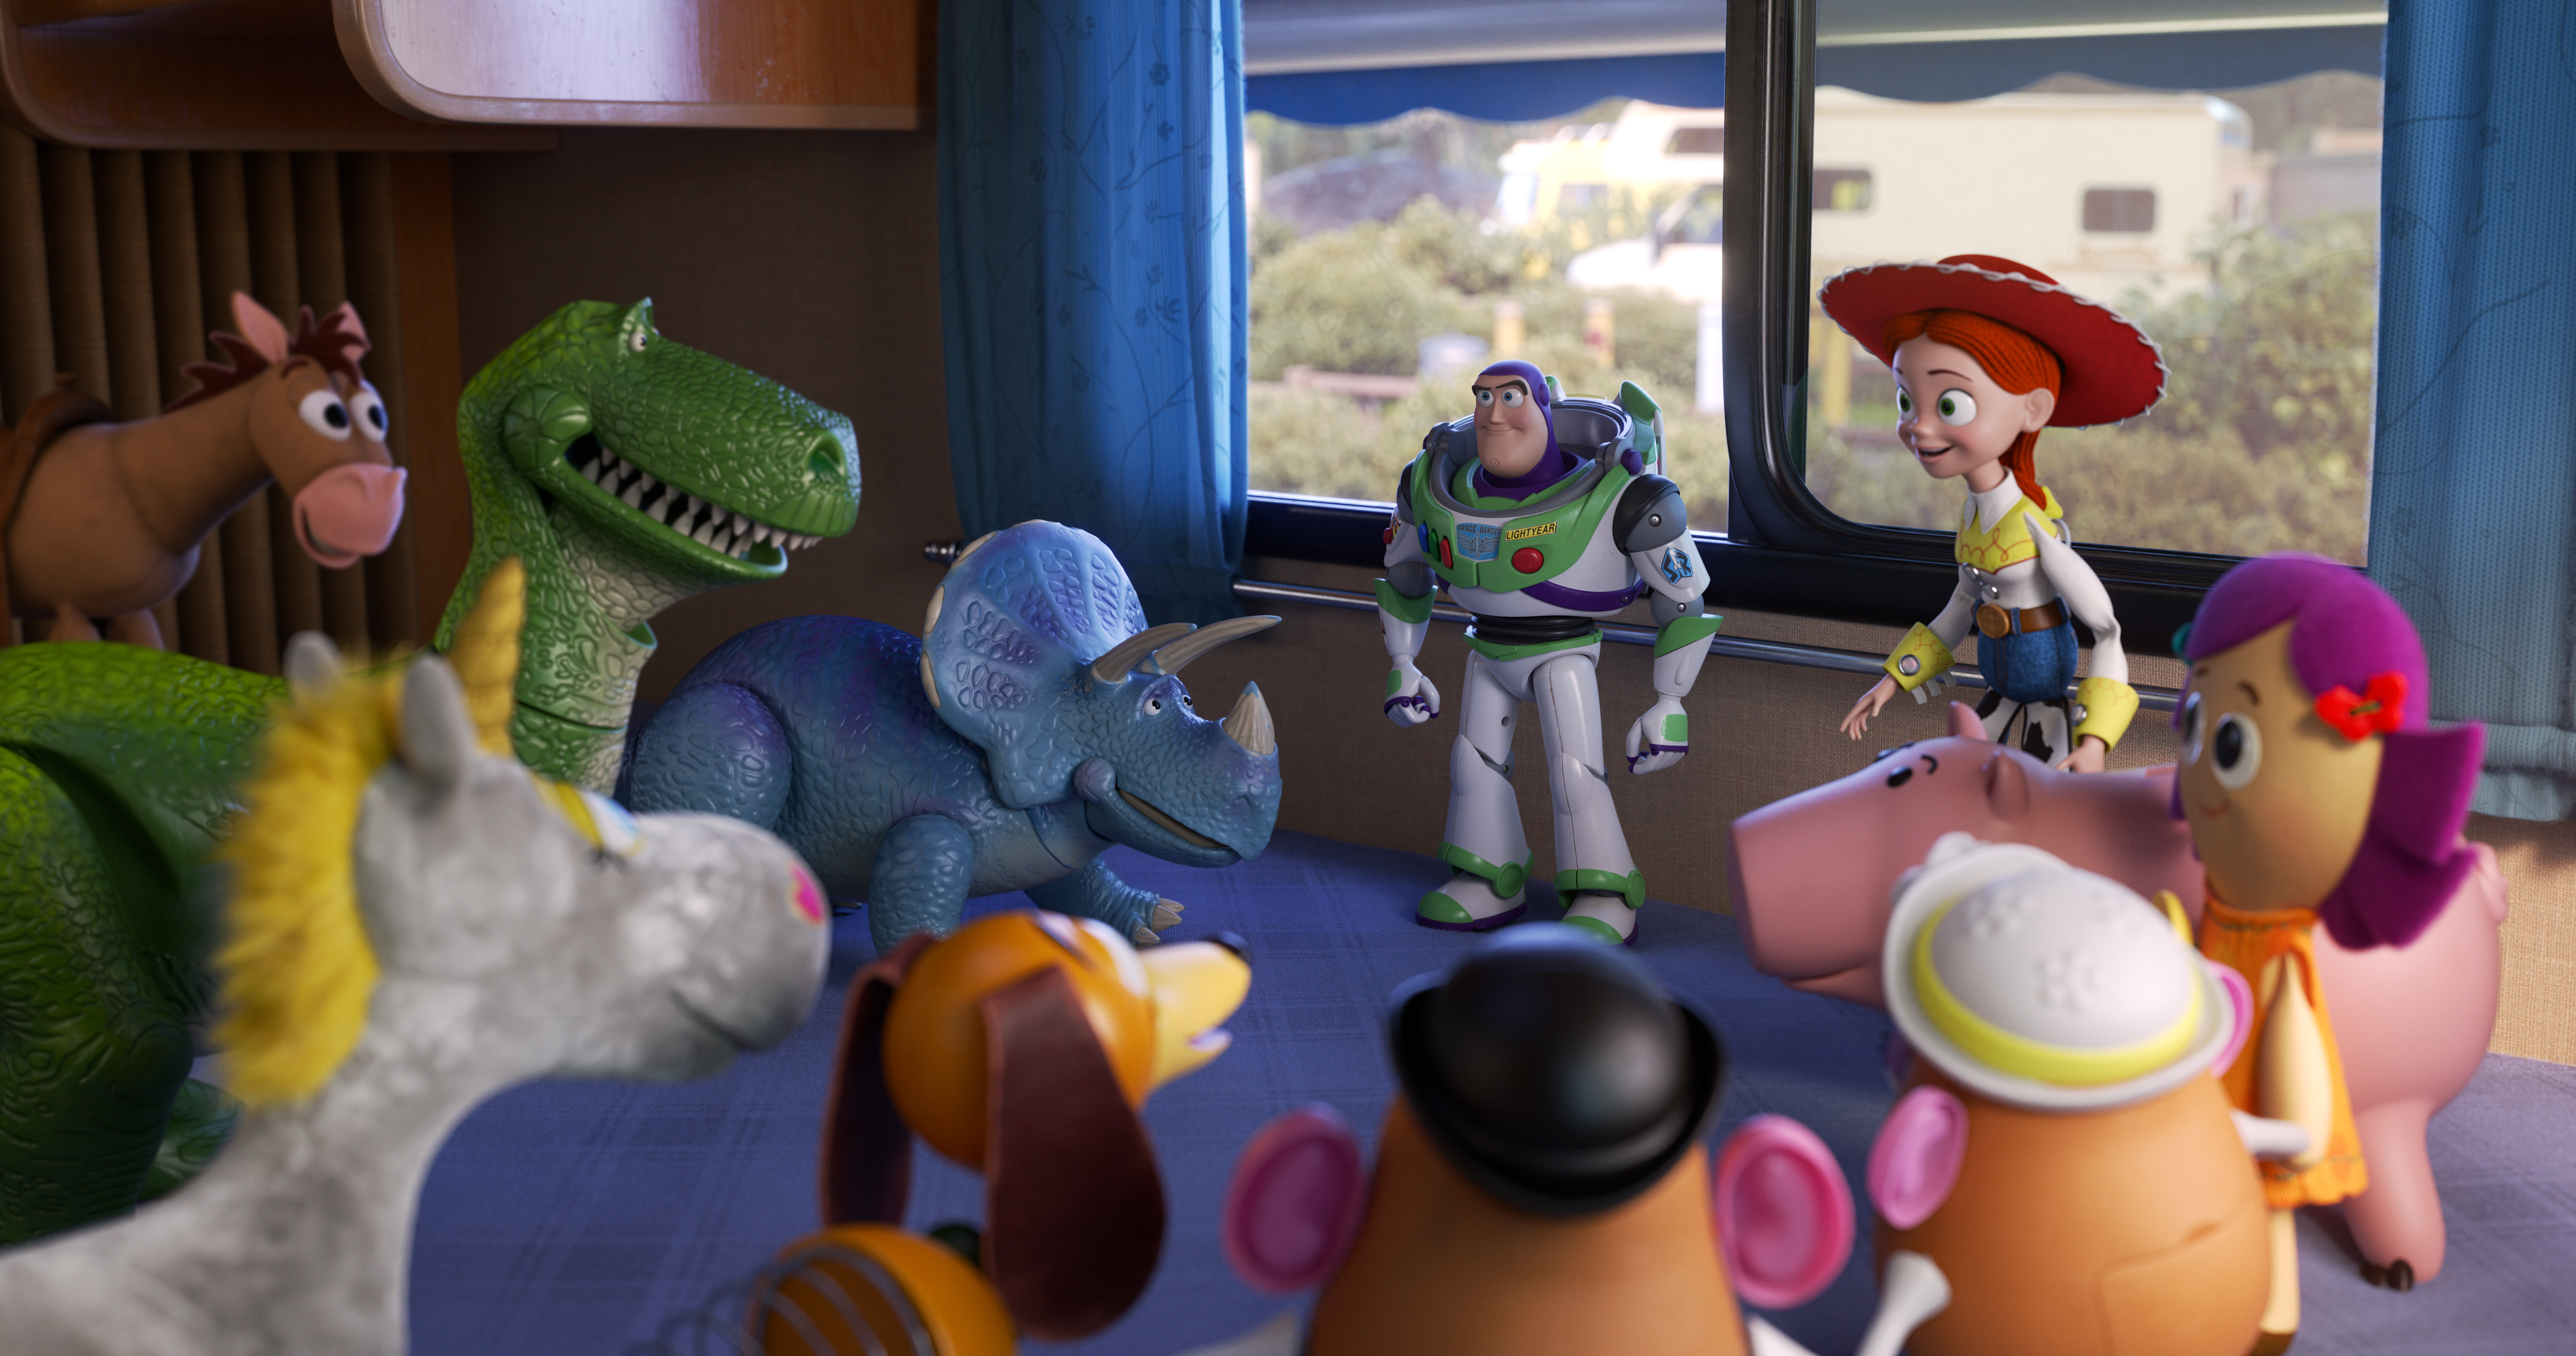 ‘Toy Story 4’ Breaking Pixar Tradition, Will Not Feature New Short